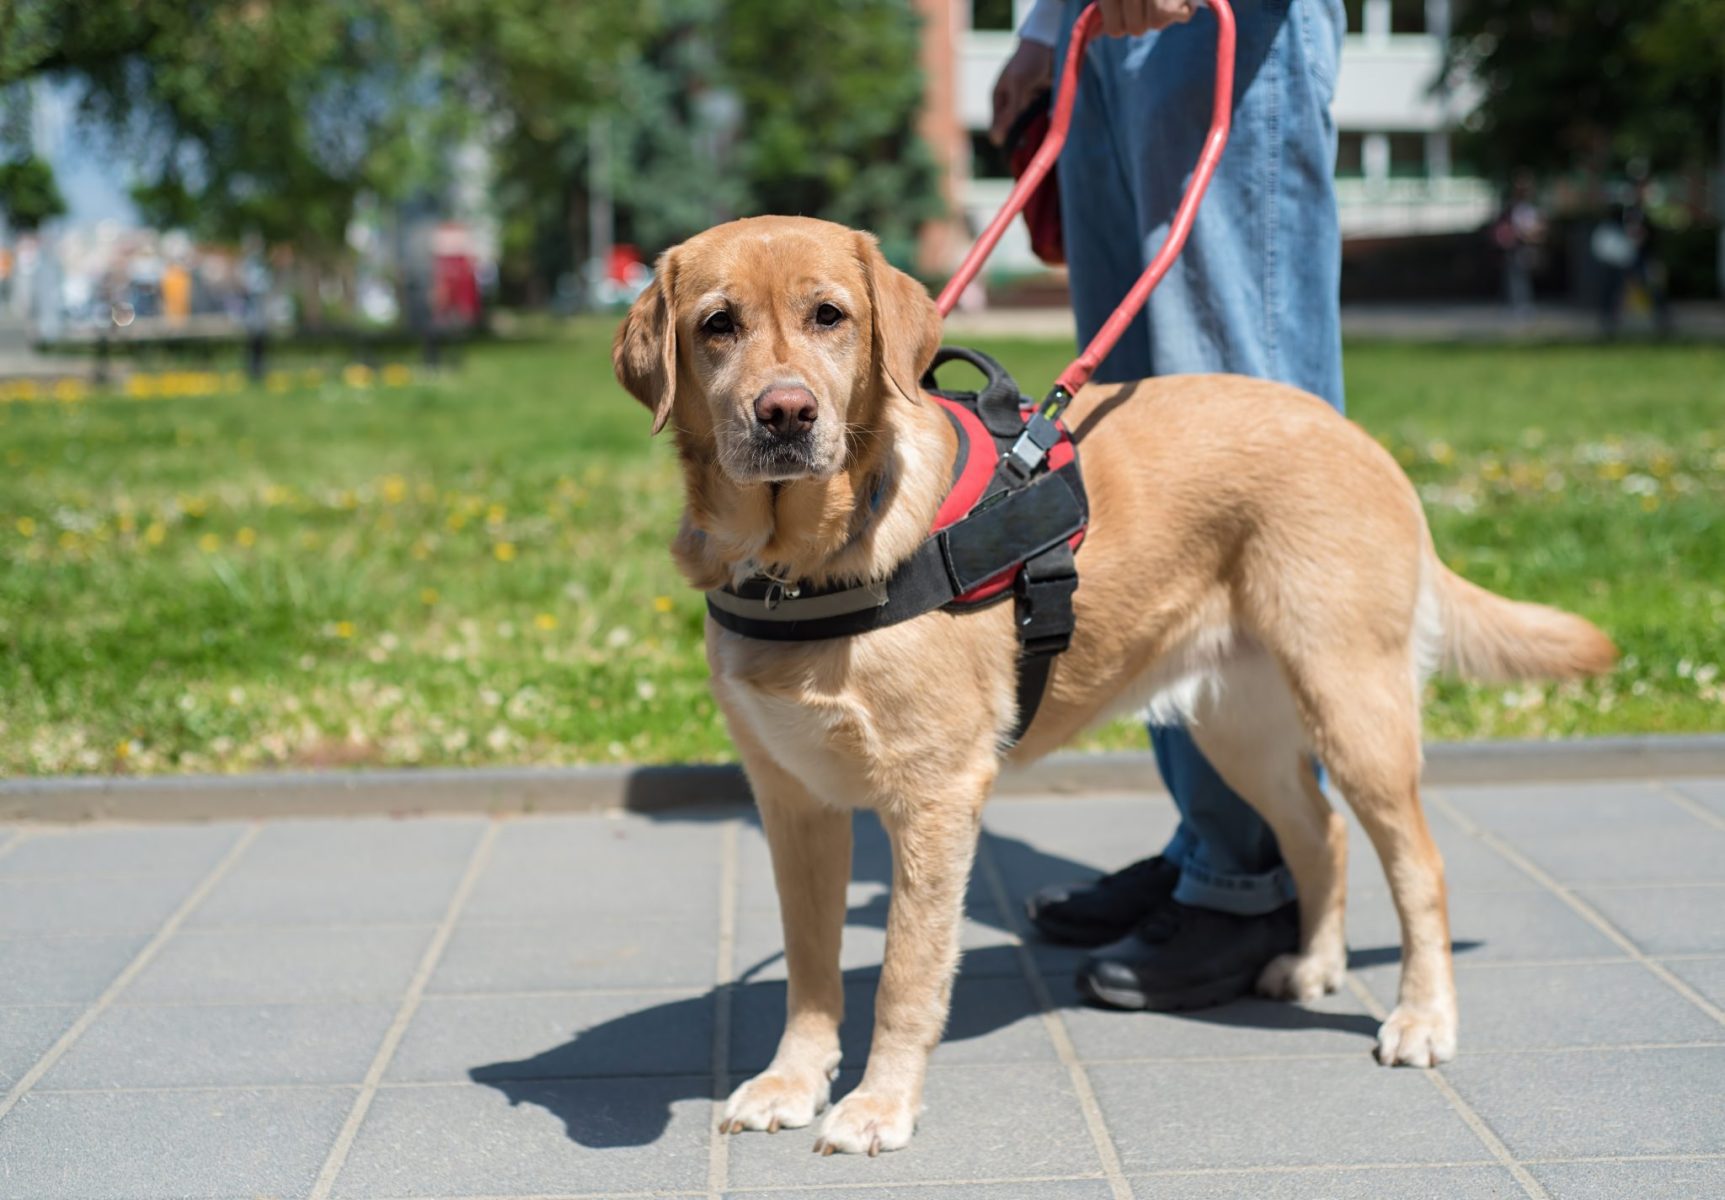 Know the Difference Between Therapy and Service Dogs